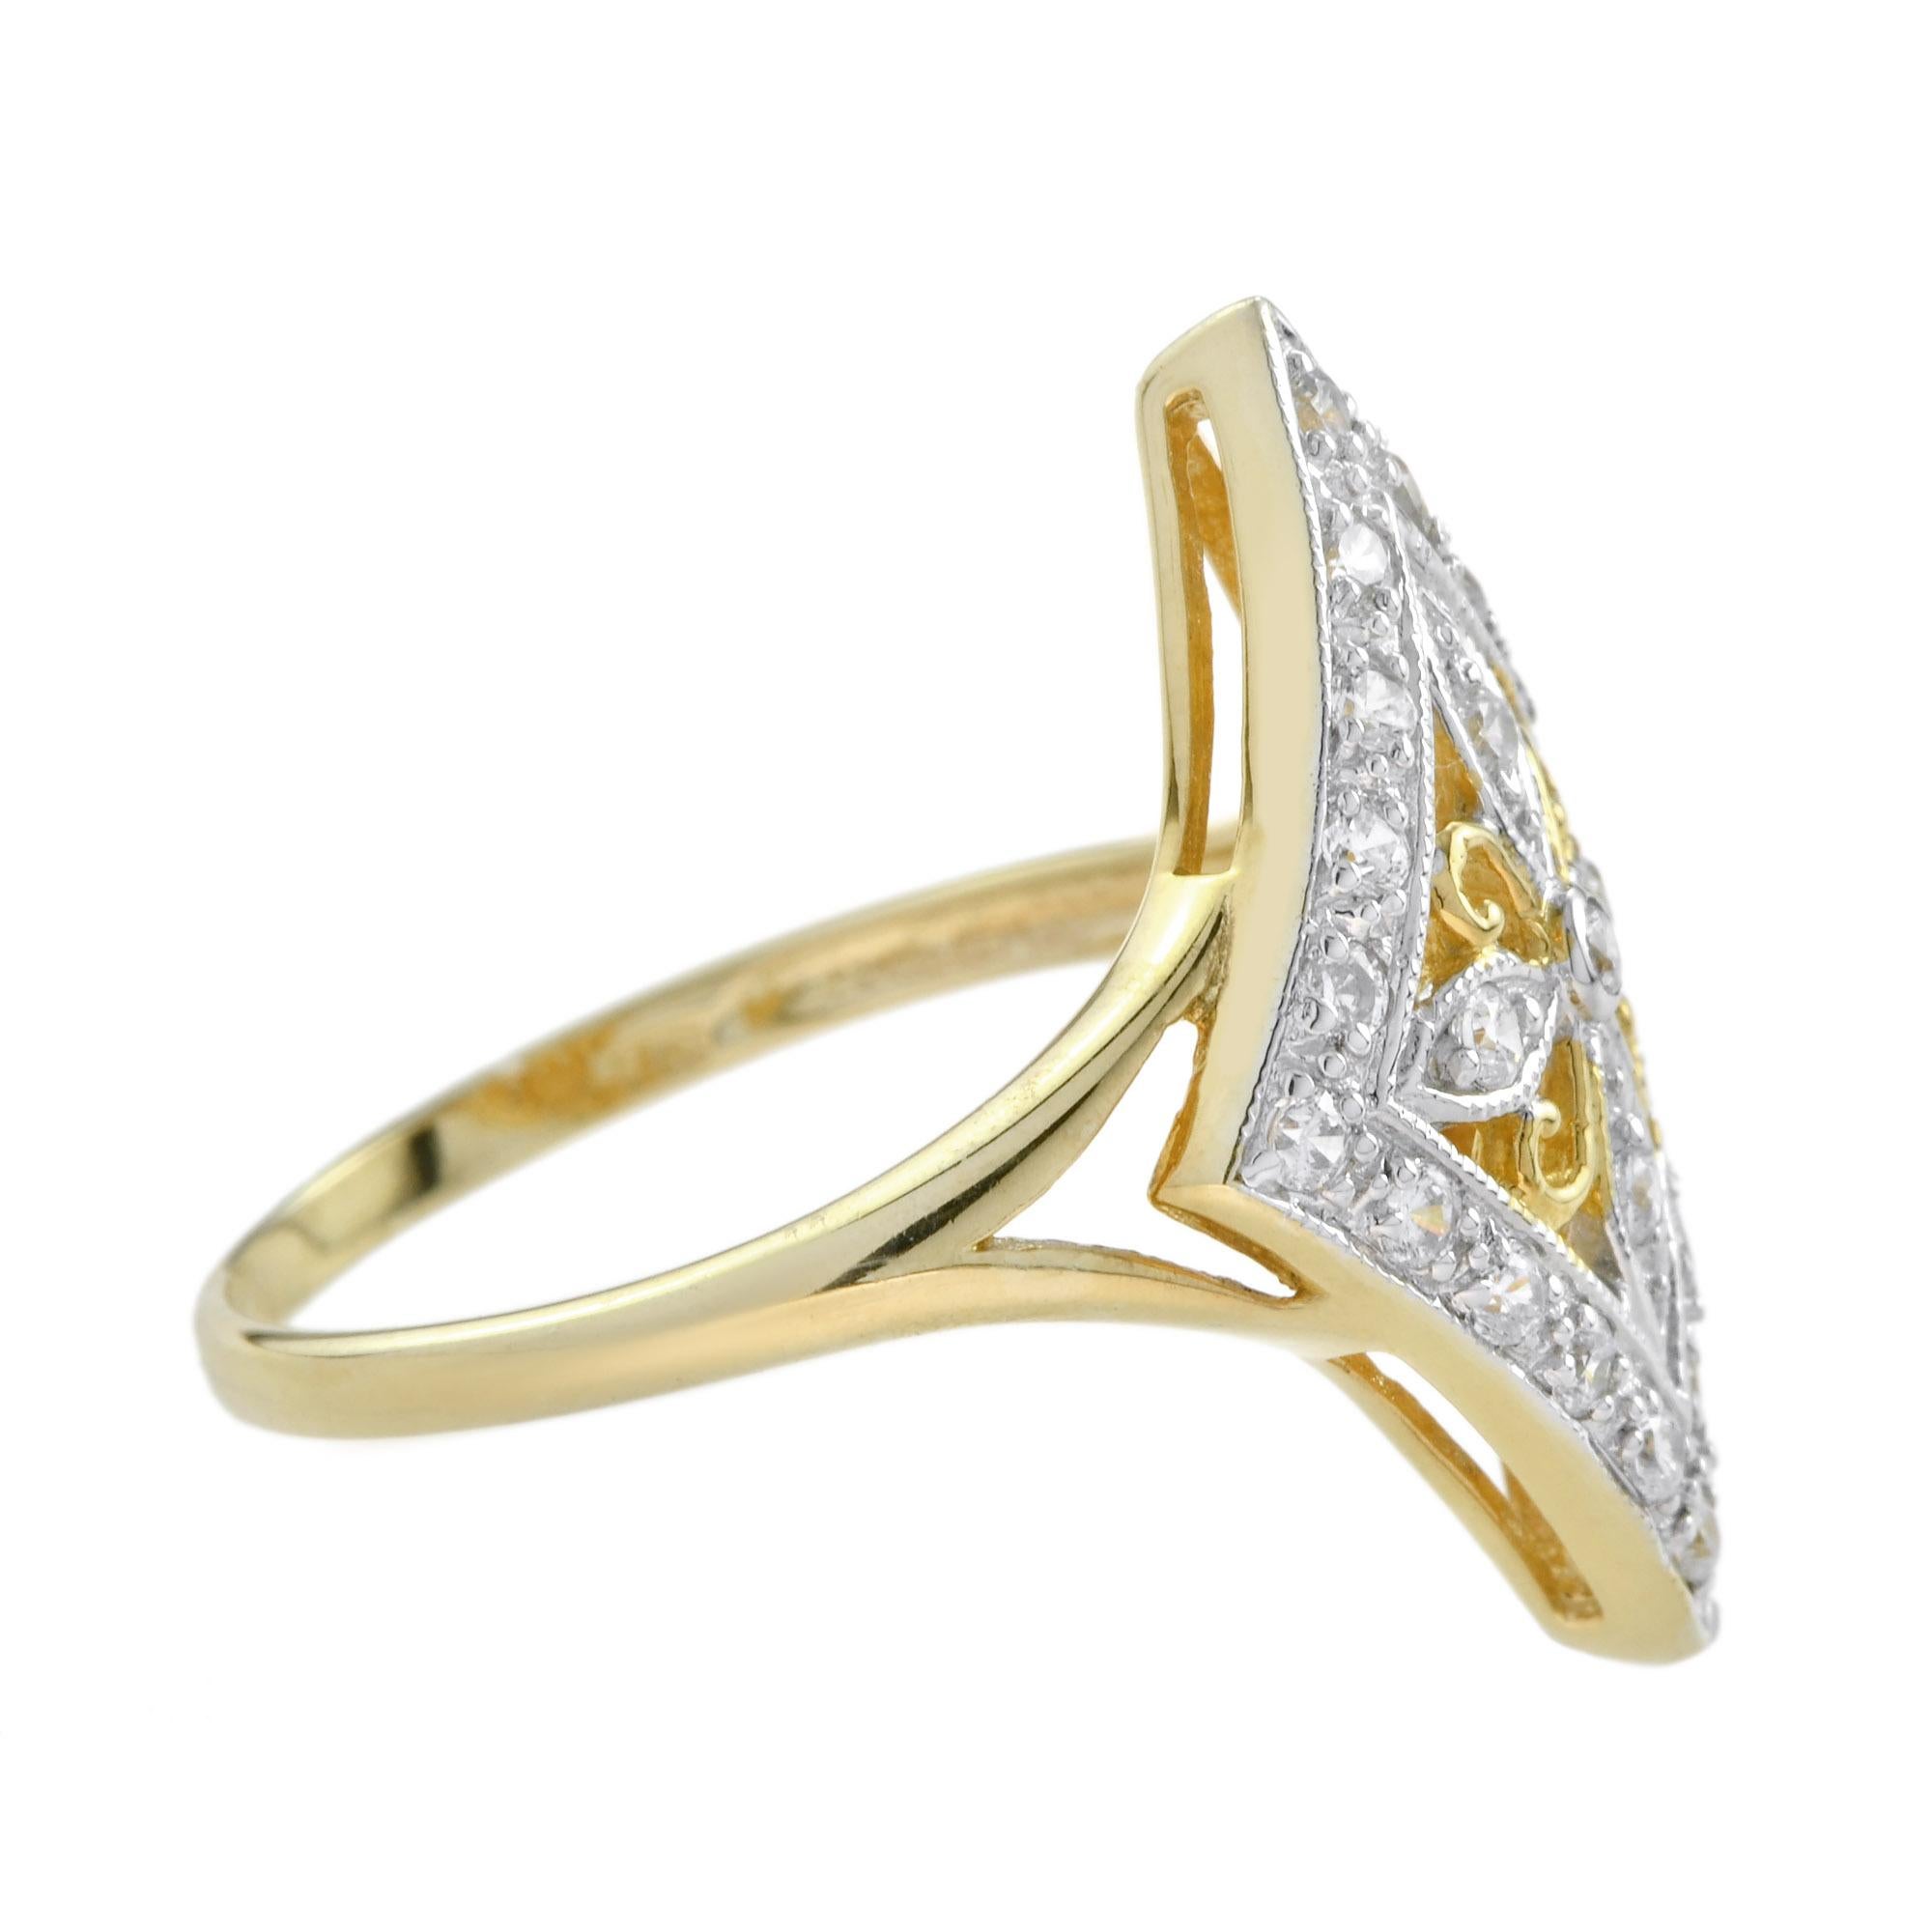 For Sale:  Vintage Style Diamond Floral Filigree Ring in 14K Yellow Gold 3